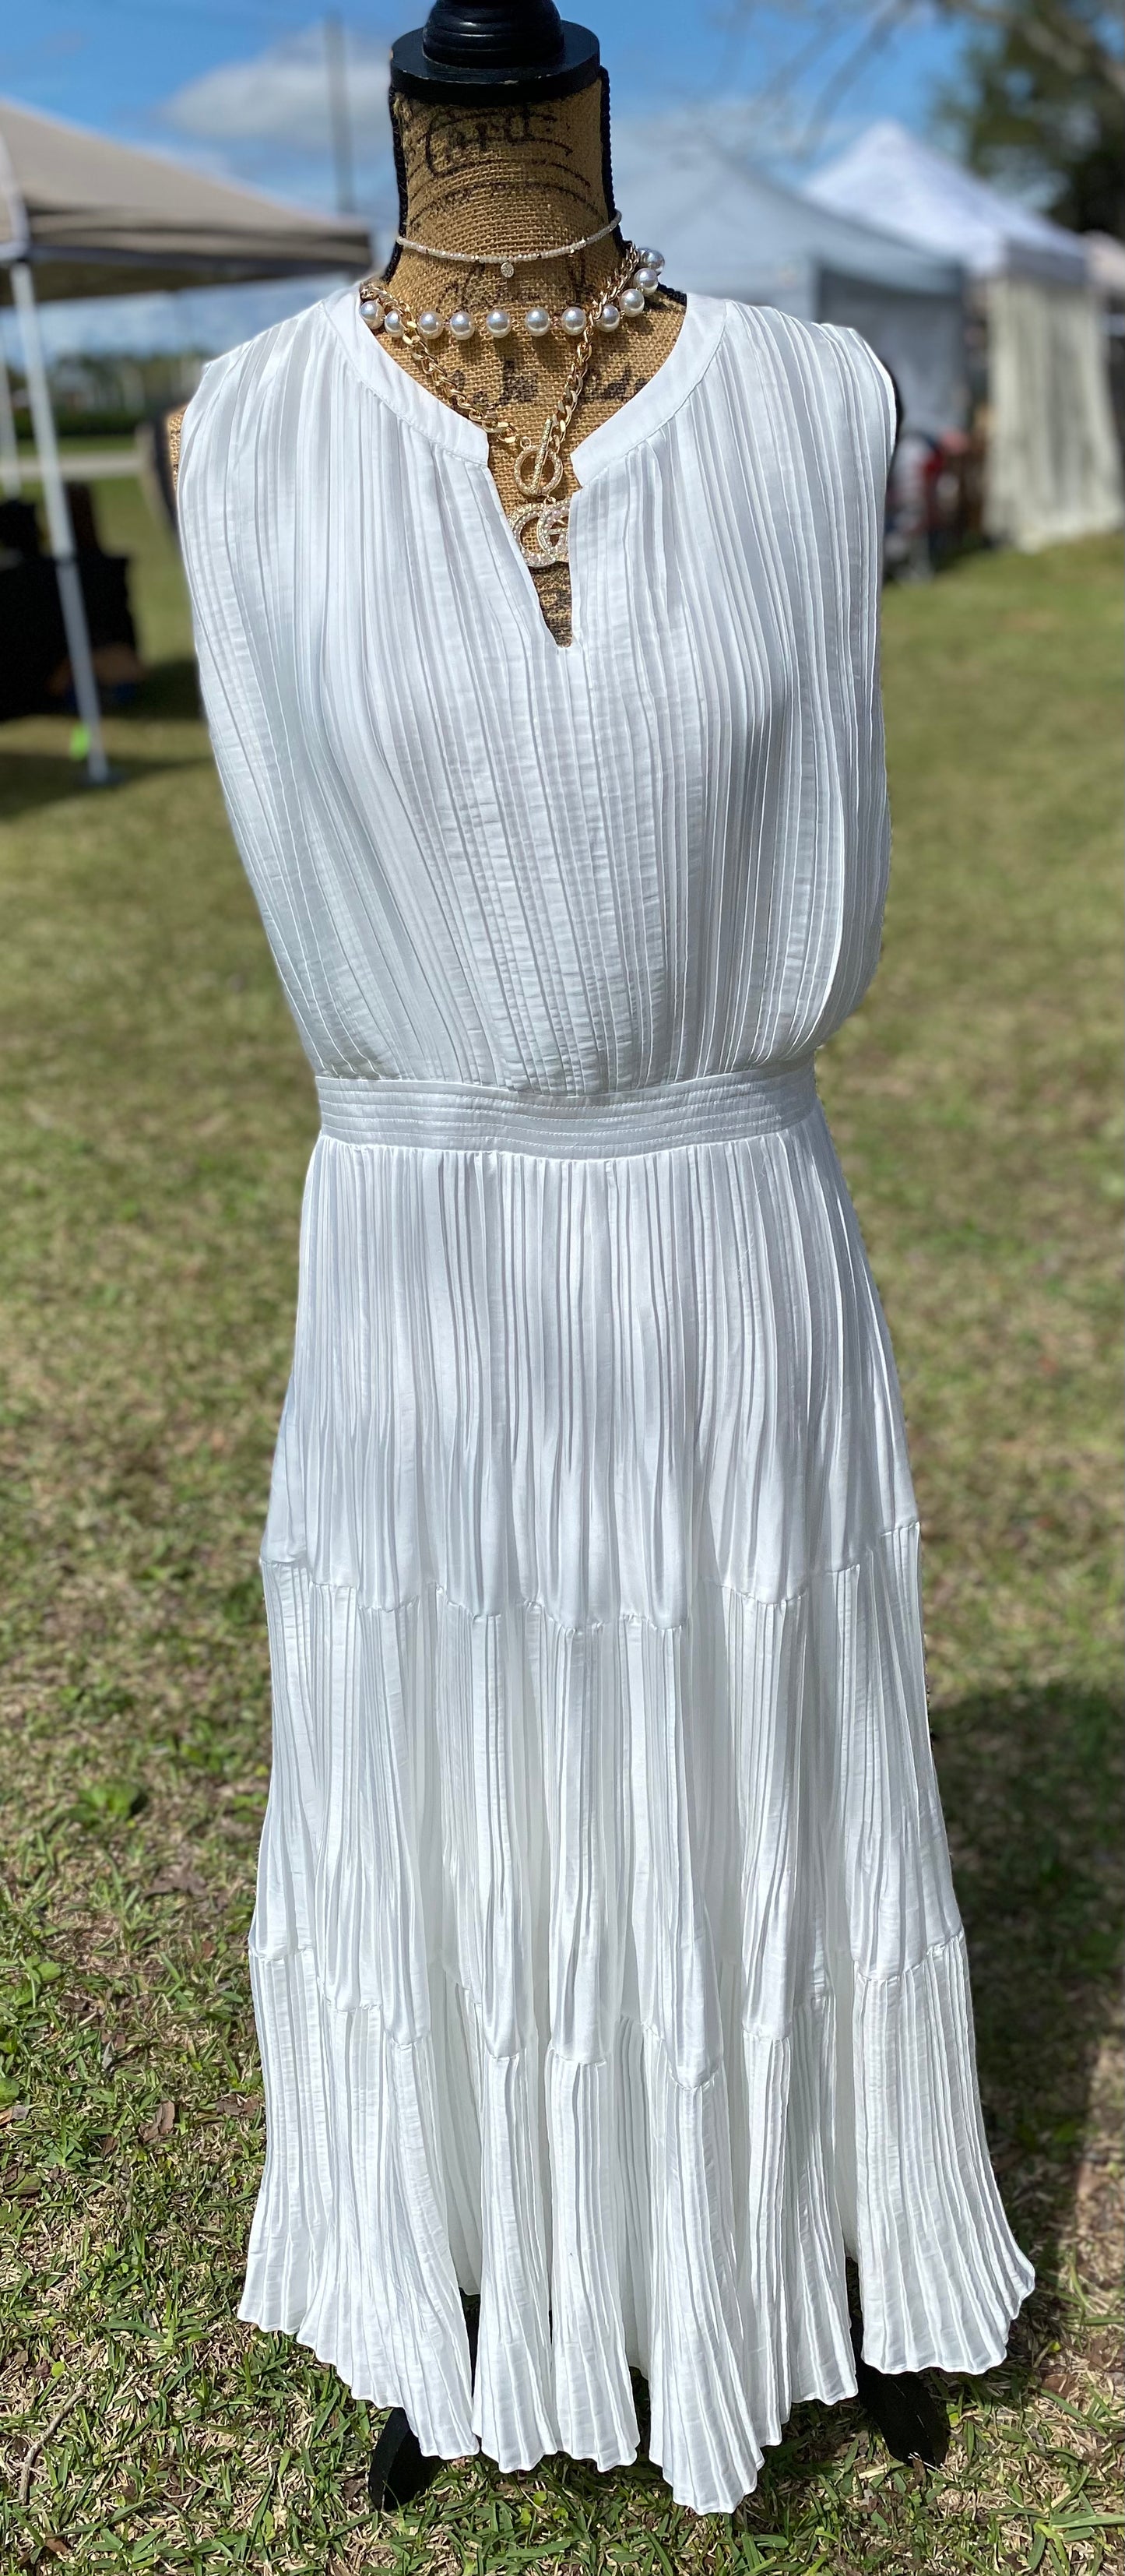 Pleated Tiered Dress